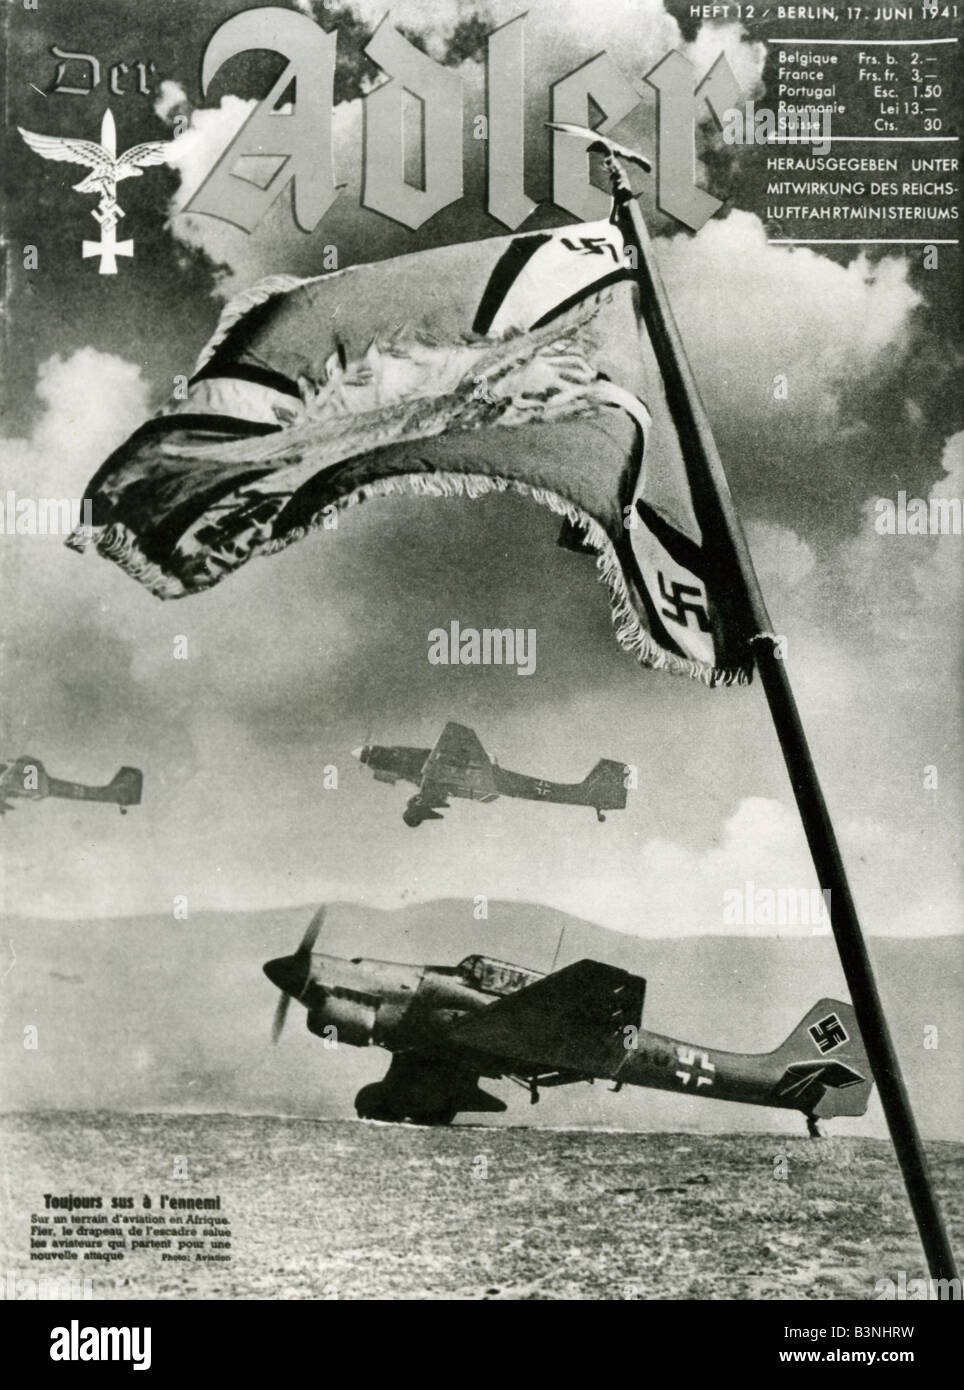 DER ADLER Magazine of the Nazi German Luftwaffe. This issue dated June 1941 features Ju 87 Stuka dive bombers on the cover Stock Photo